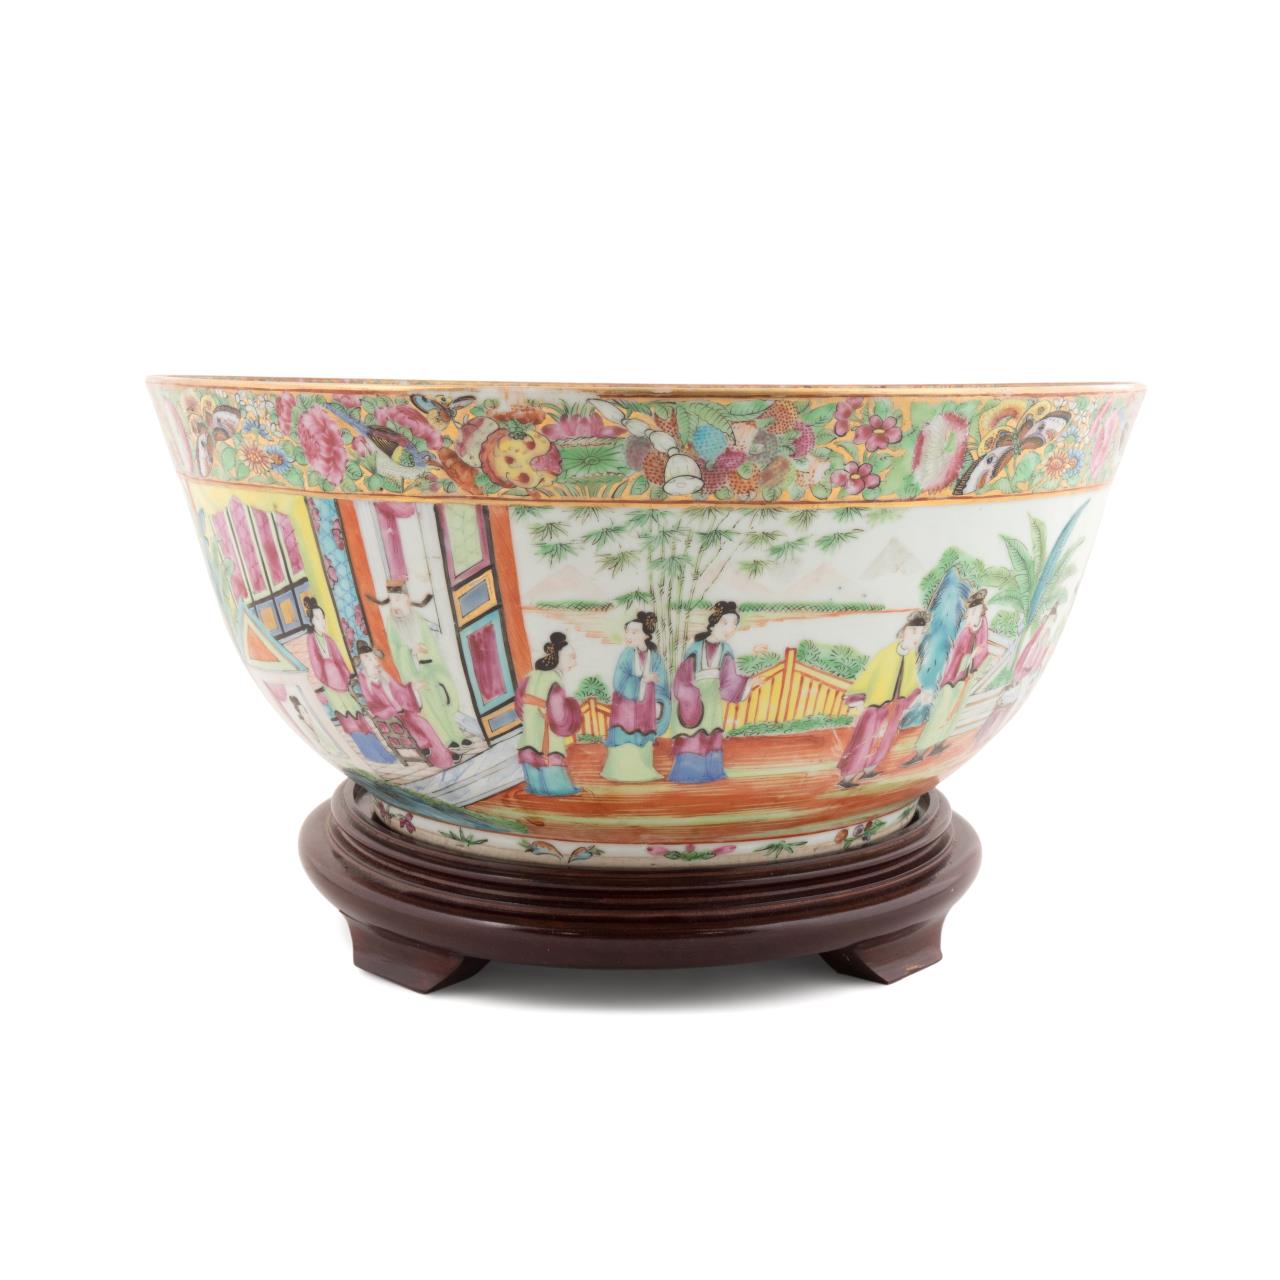 CHINESE ROSE MEDALLION PUNCH BOWL 2f95f6